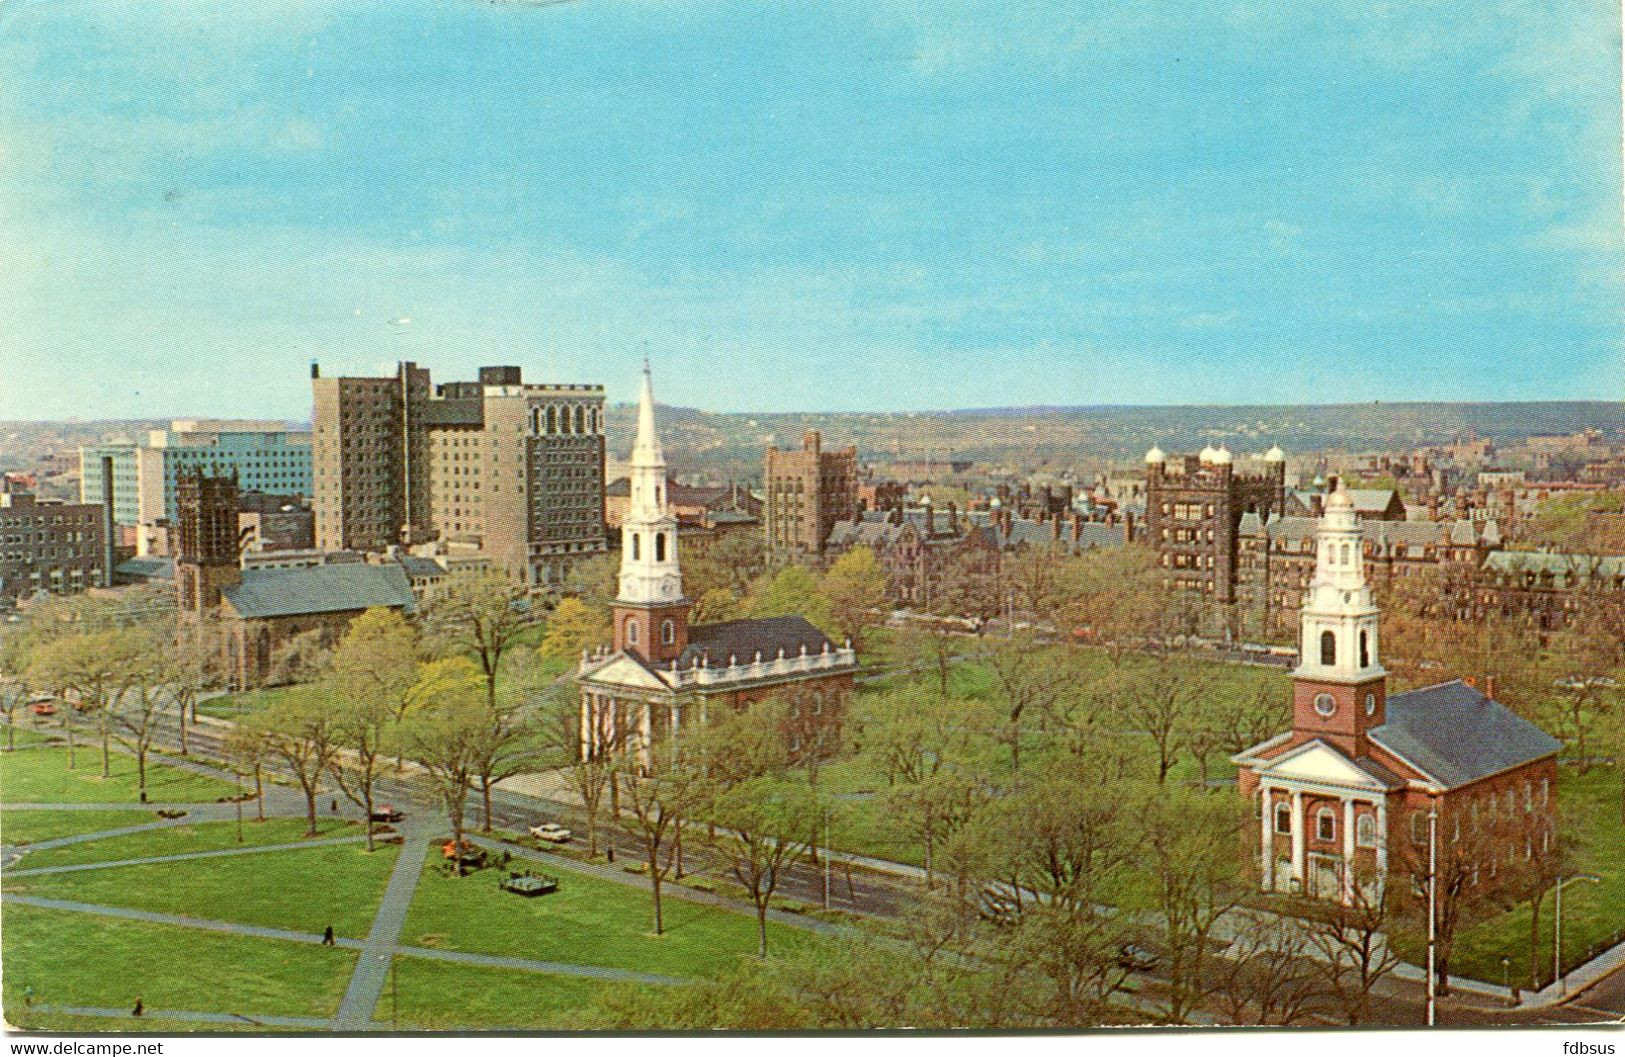 1976 New Haven - The Three Churches On The Green - Postcard To Belgium - See Stamps And Cancellations - New Haven